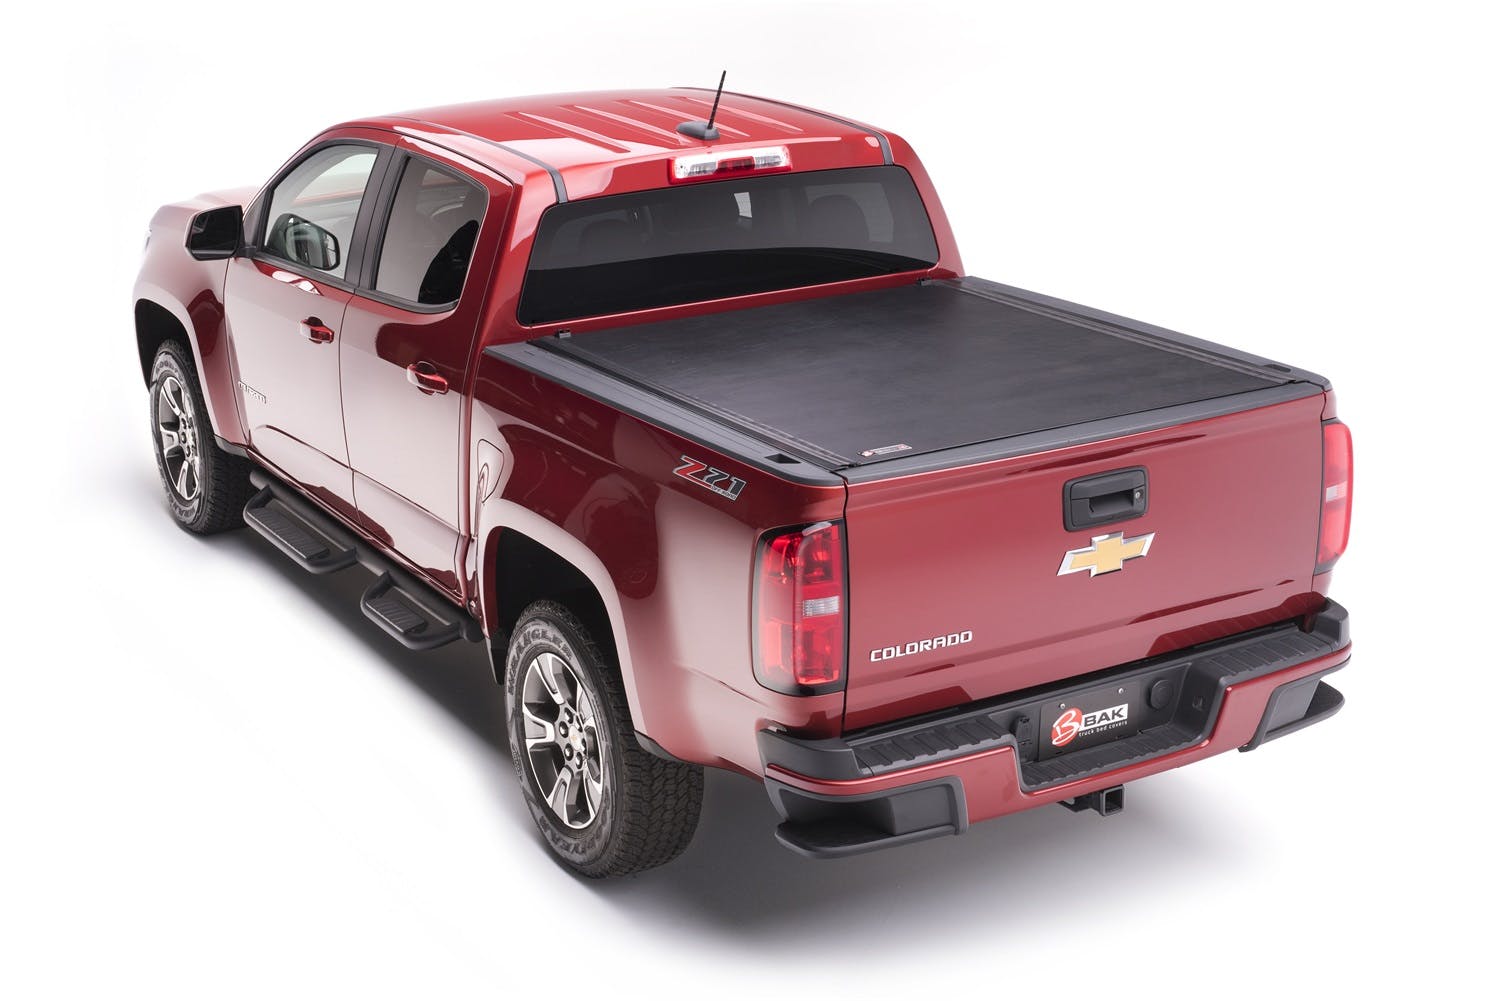 BAK Industries 39125 Revolver X2 Hard Rolling Truck Bed Cover